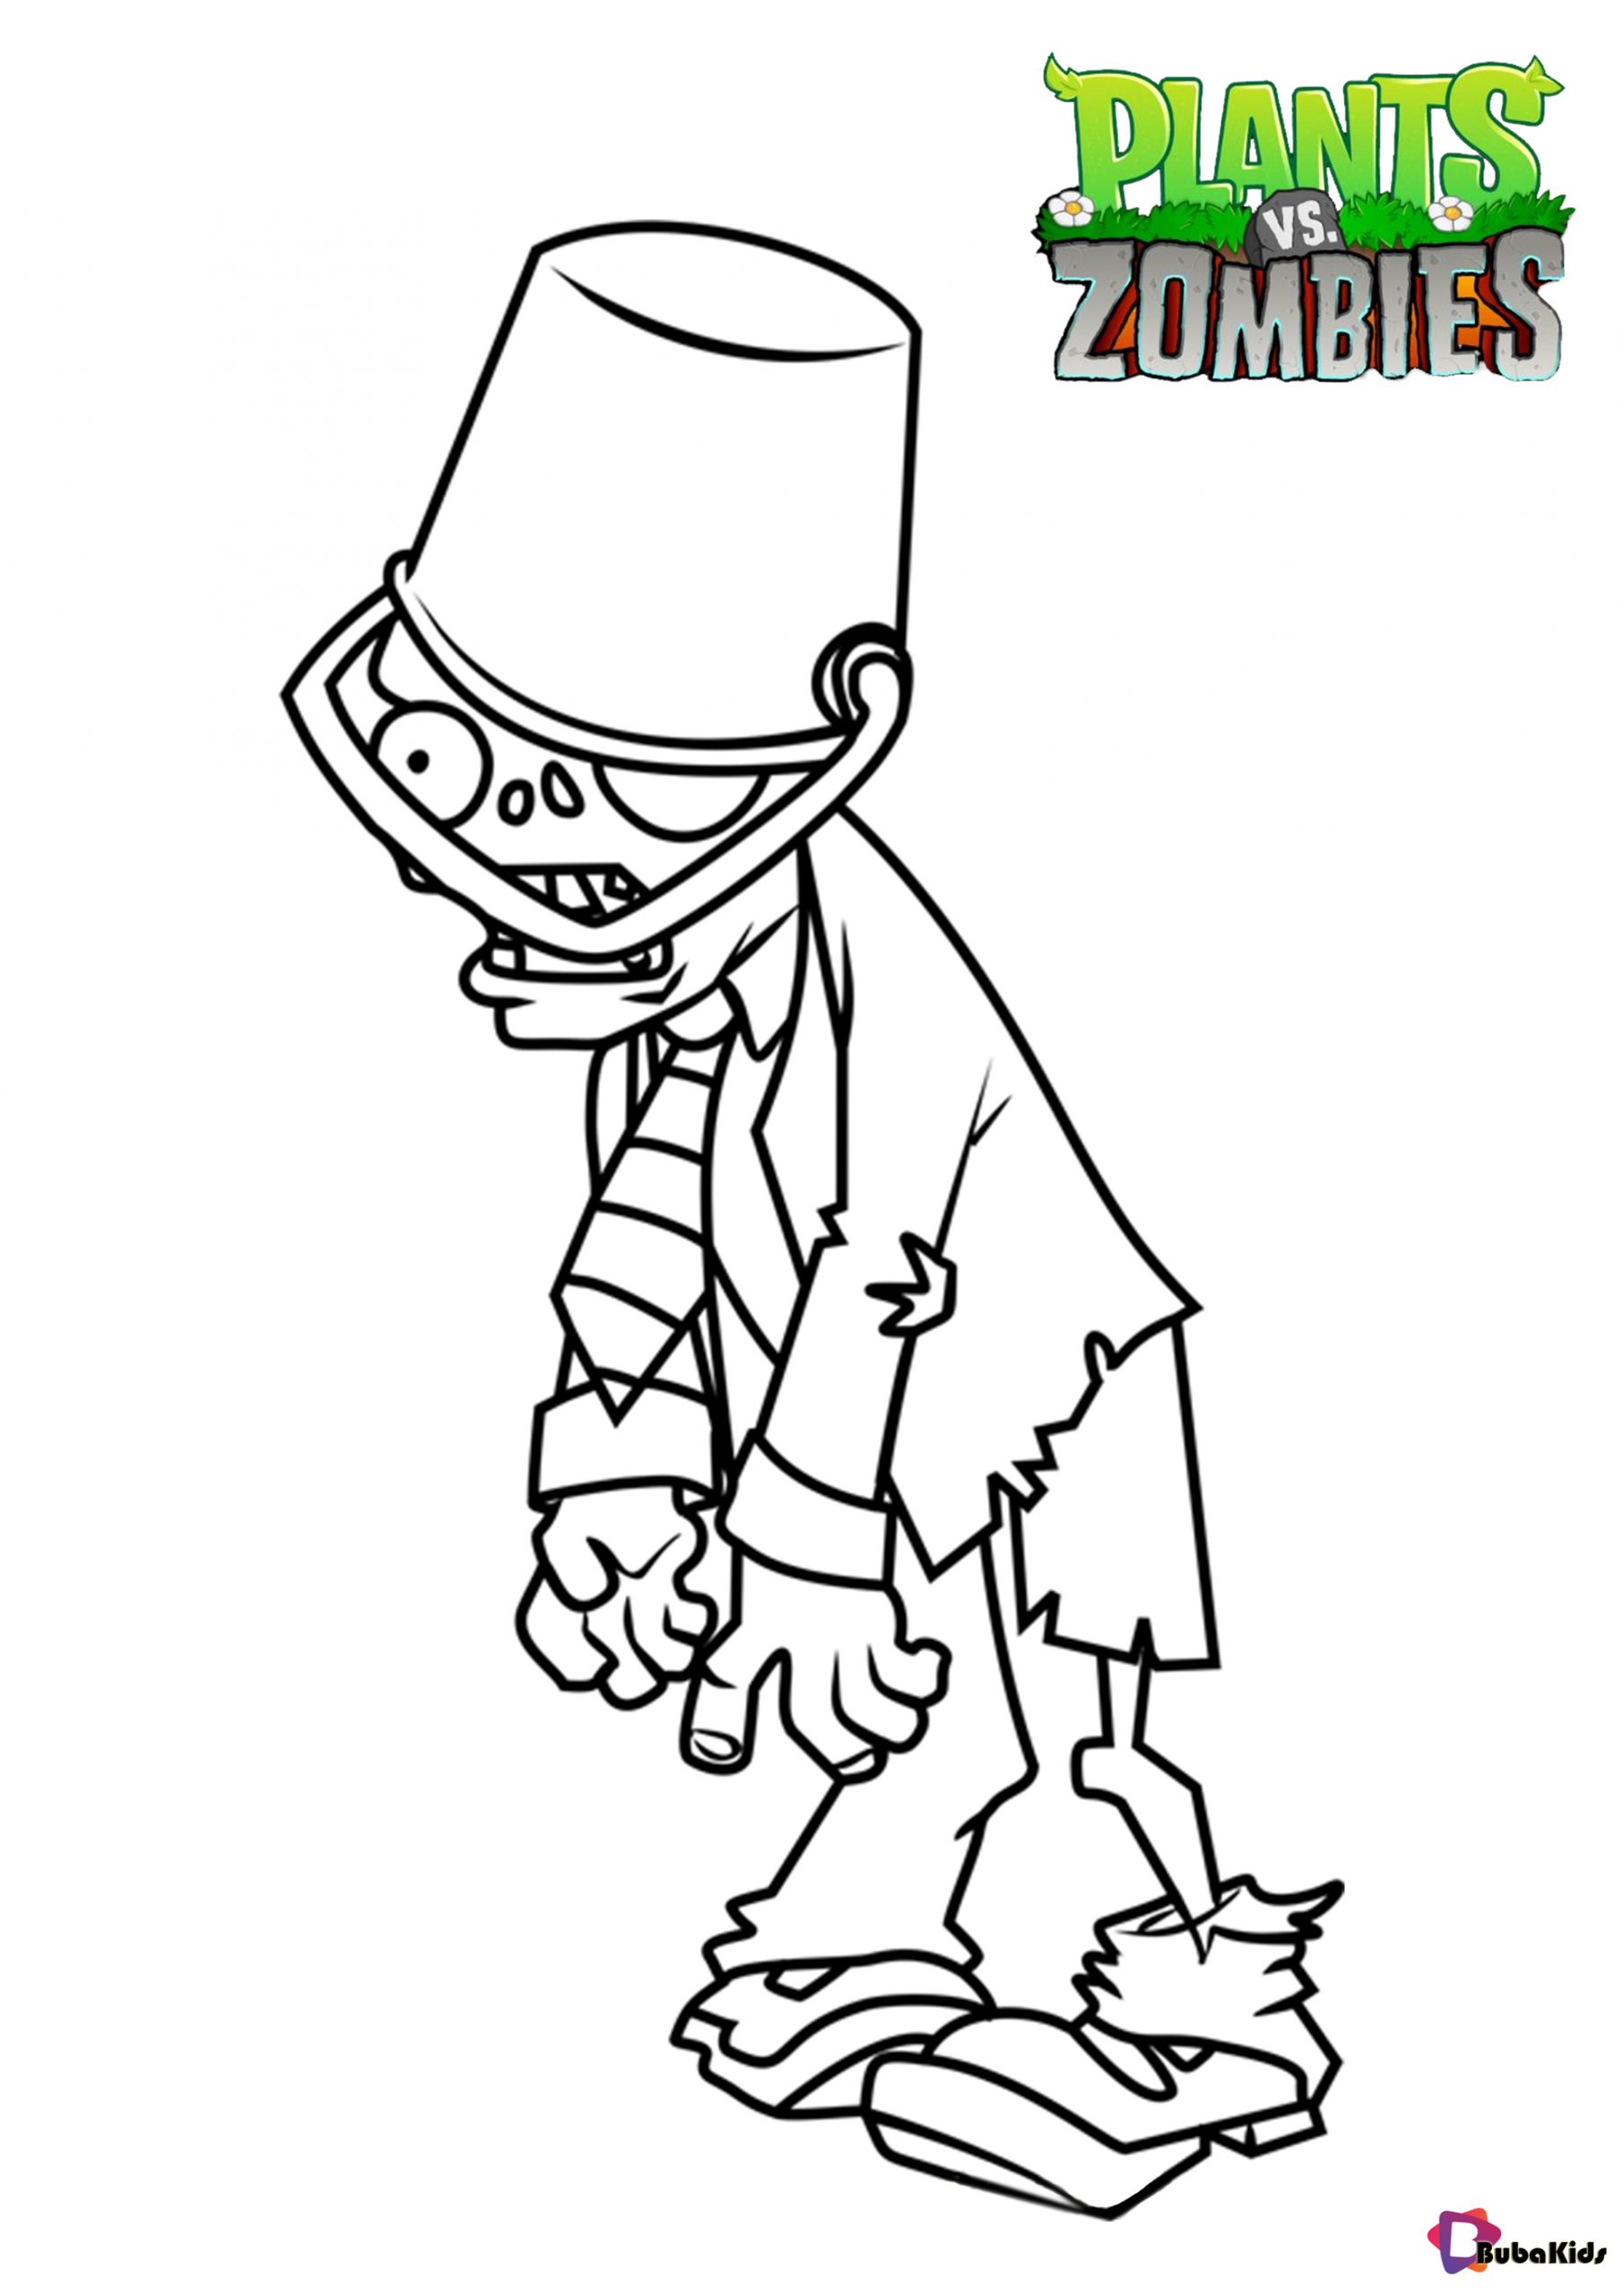 Plants vs Zombies Buckethead zombie coloring page Wallpaper